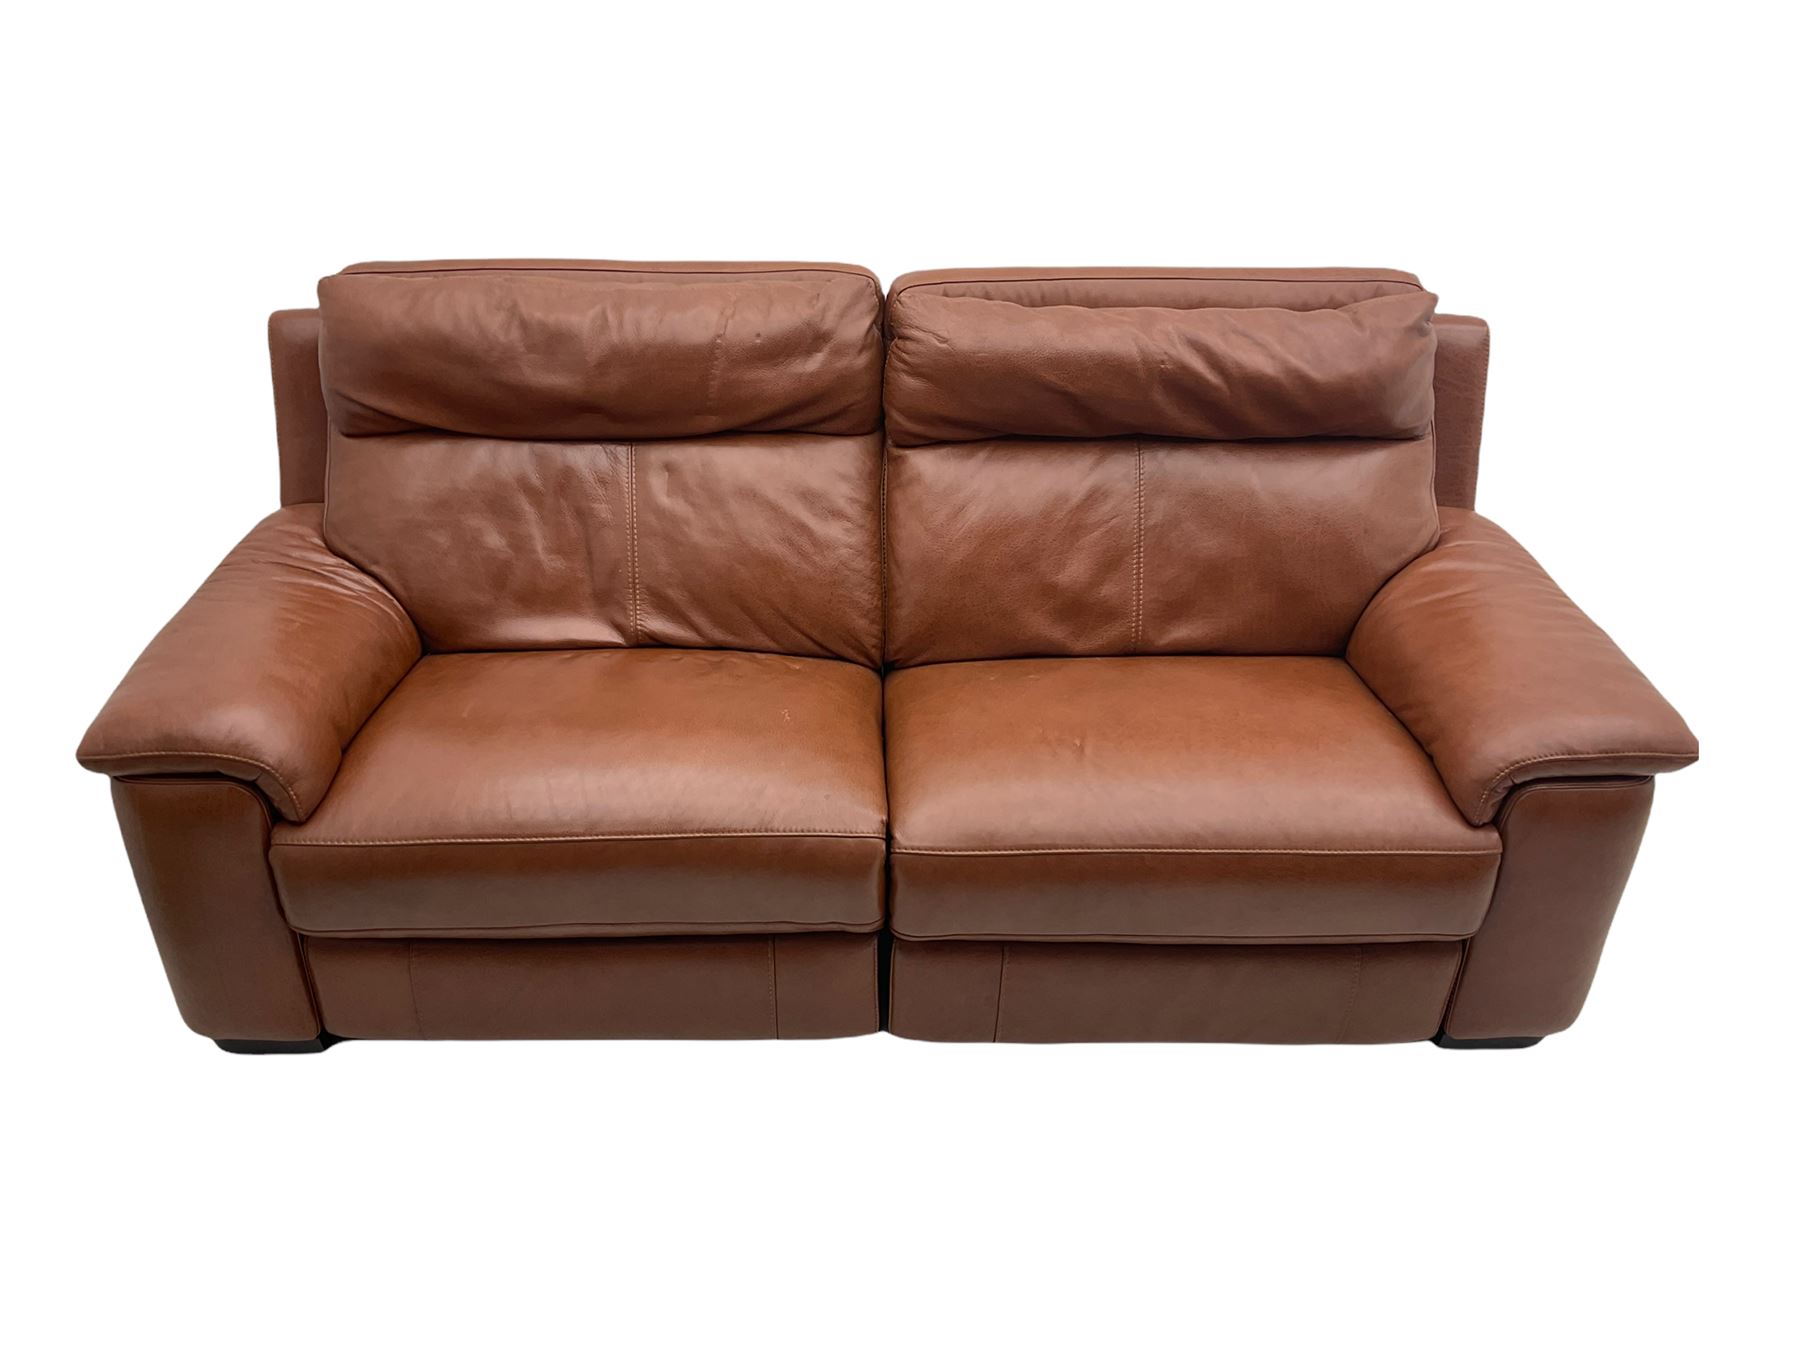 Three electric reclining sofa upholstered in tan leather - Image 3 of 23